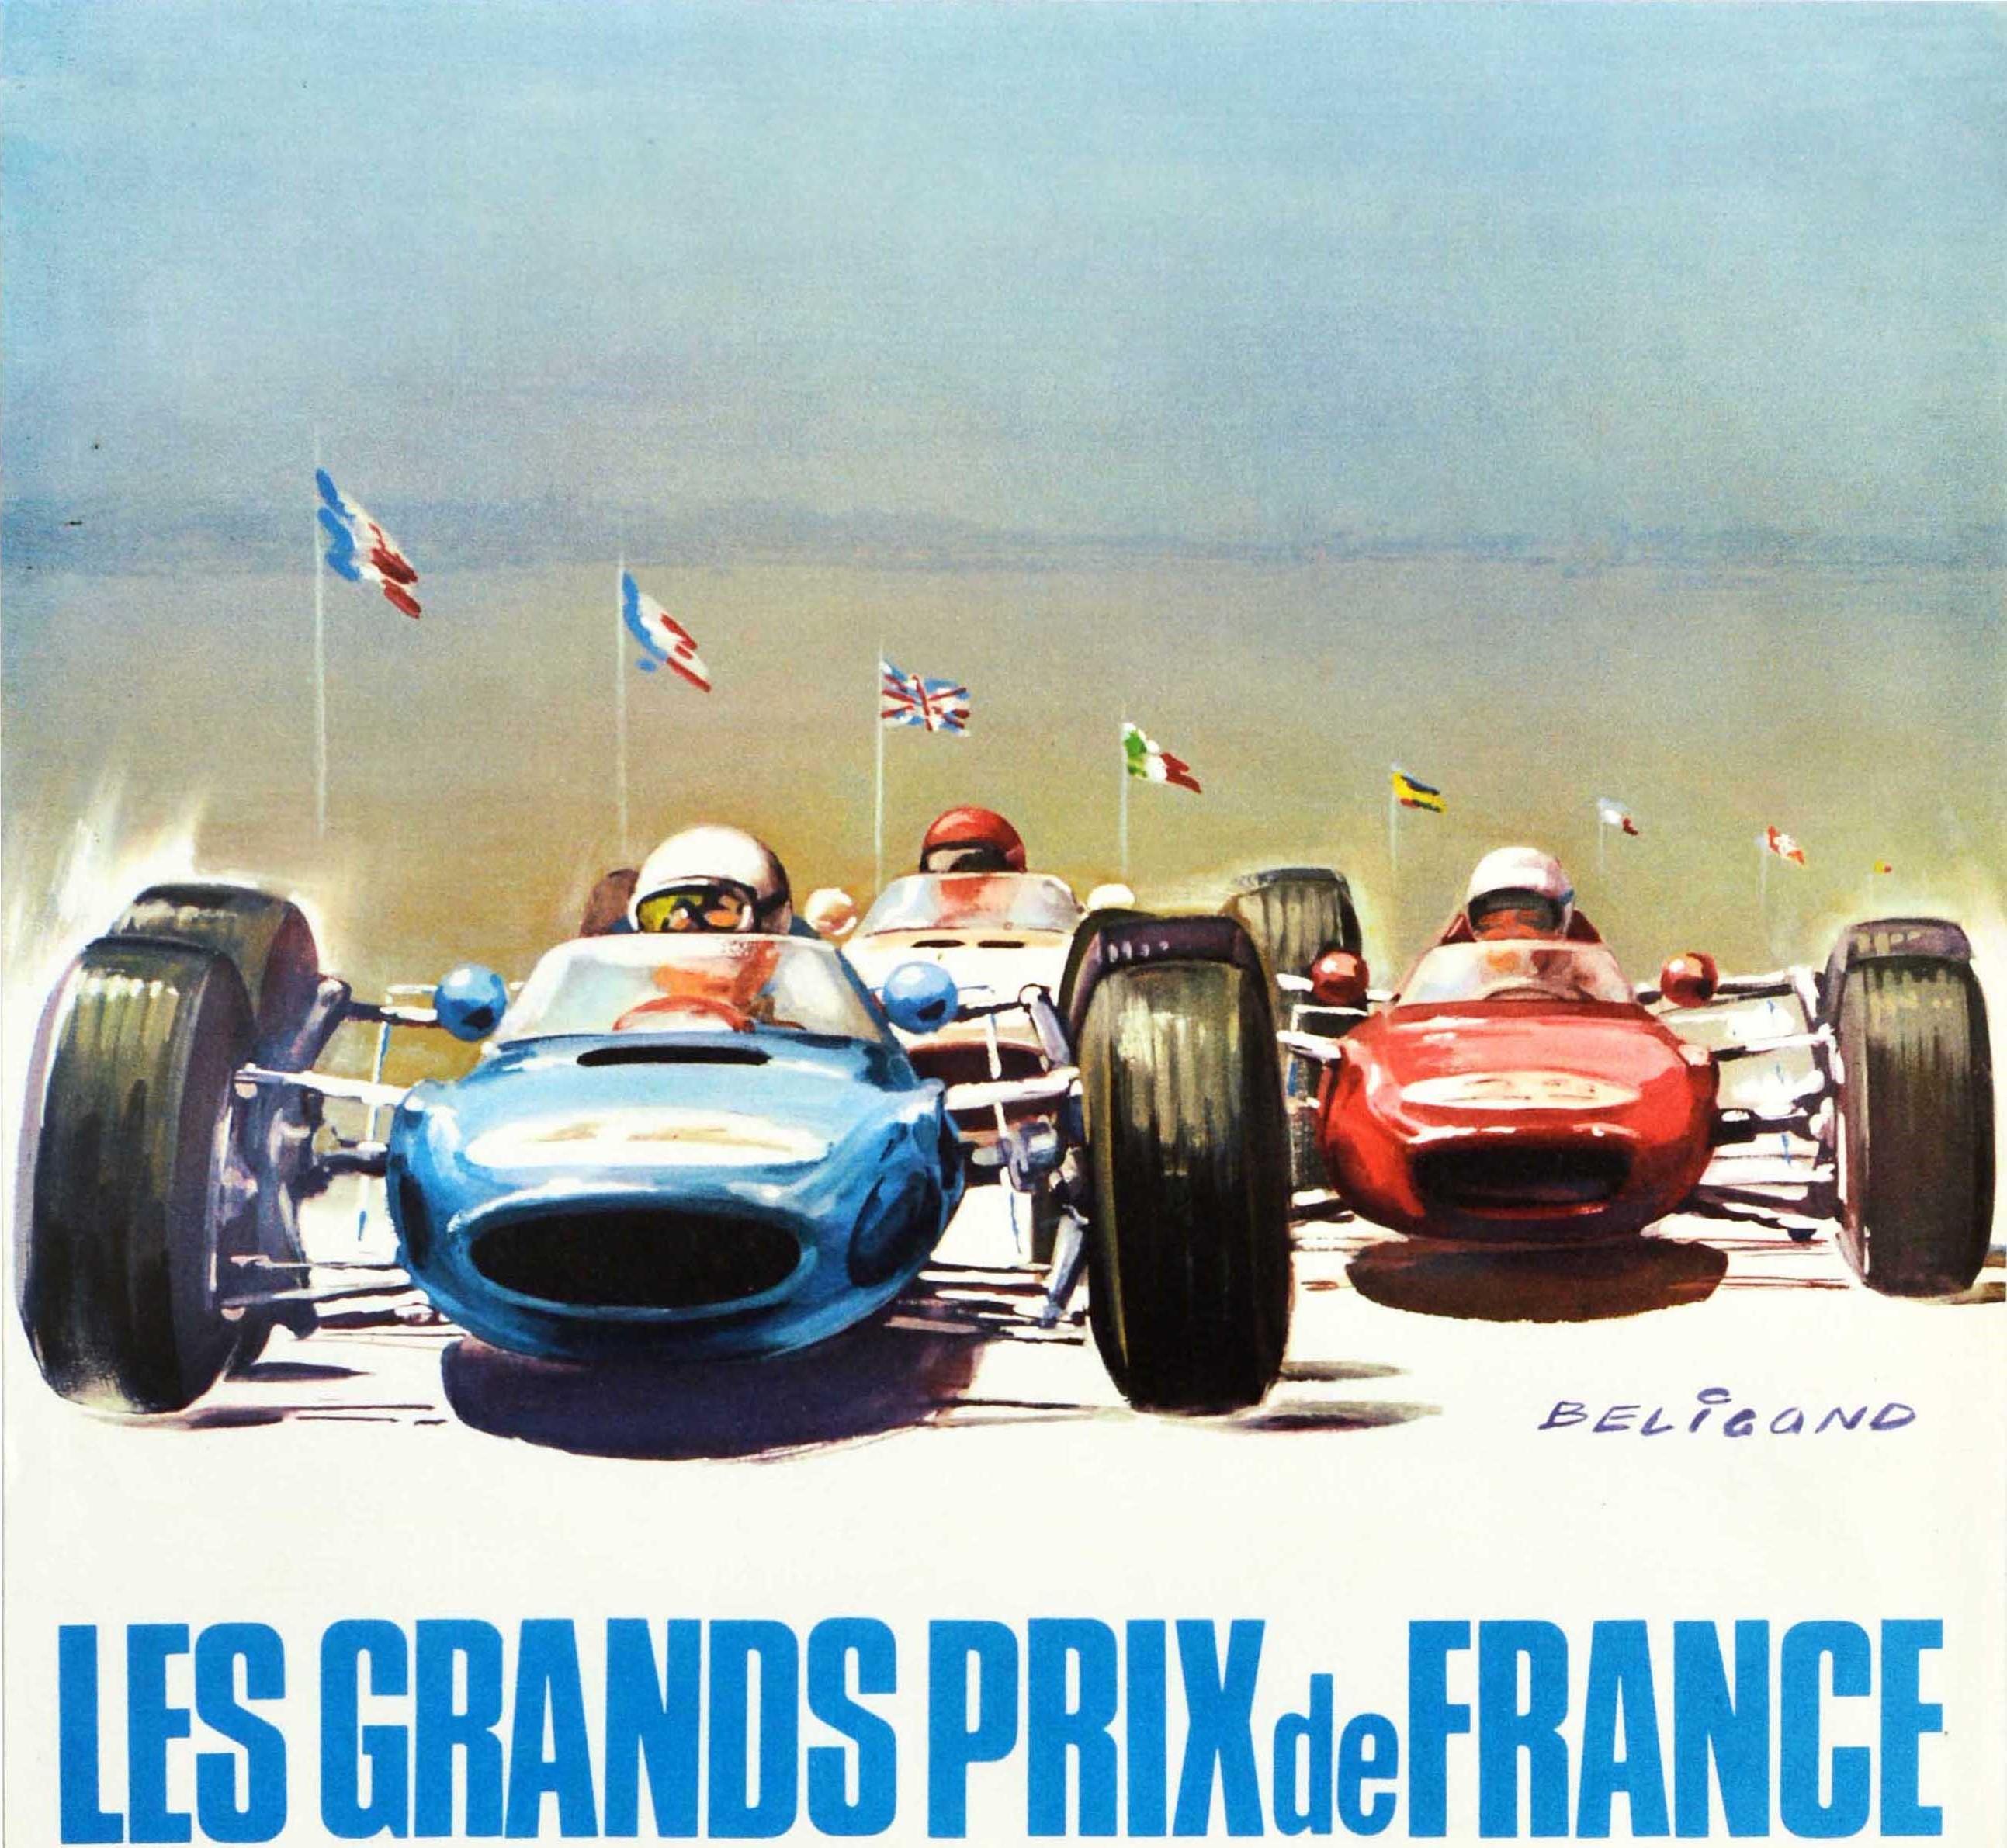 Original vintage Formula 1 auto racing poster for the French Grand Prix / Les Grands Prix de France French Federation Trophy of Motor Sports International Speed Cup Trophy Craven A Challenge Cup on Saturday 2 July and Sunday 3 July 1966 in Reims